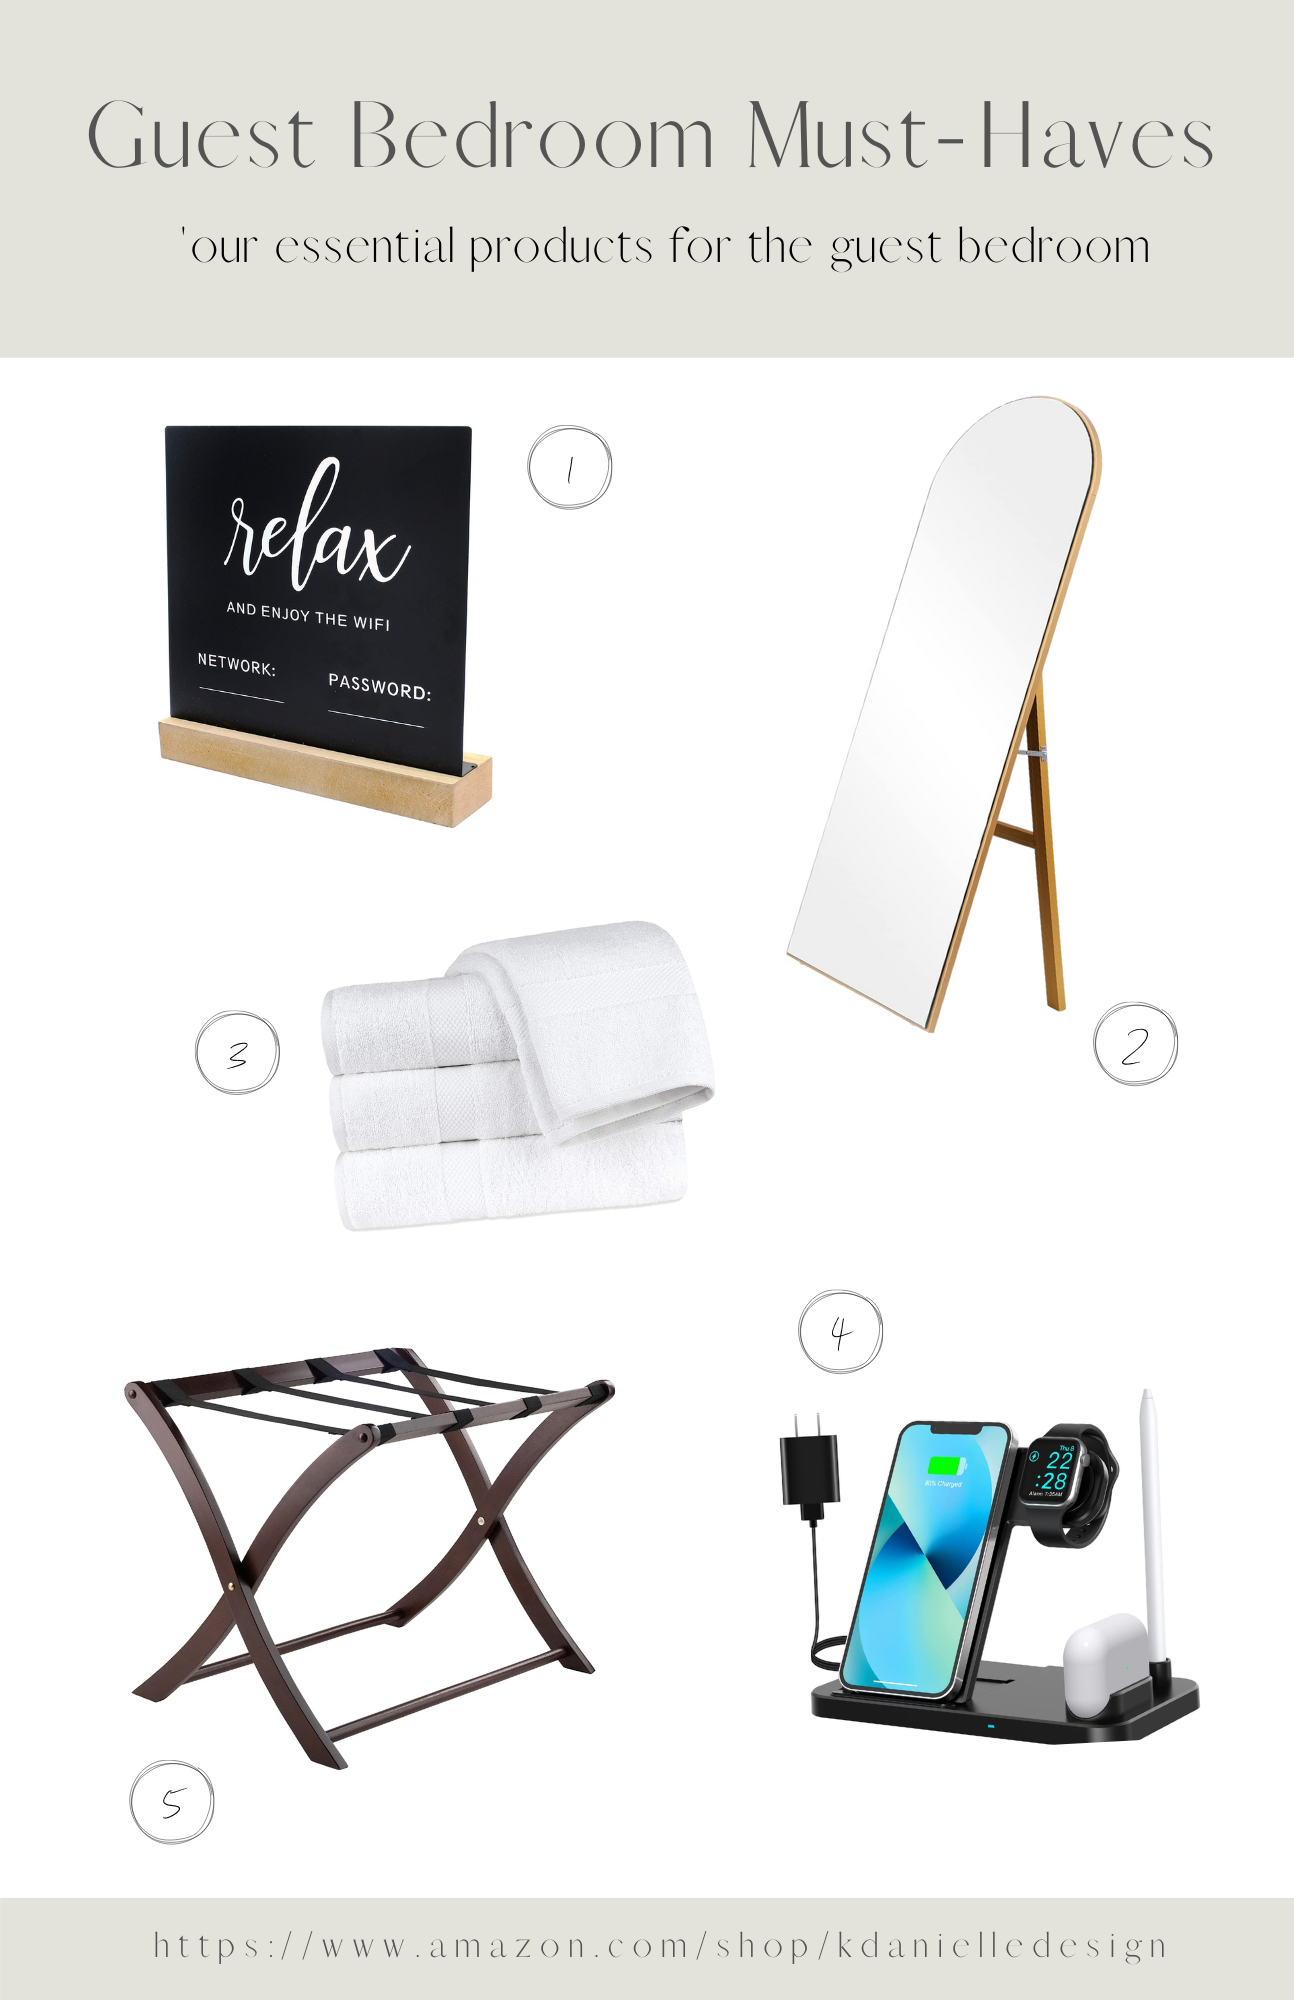 Guest Bedroom Must-Haves From Amazon